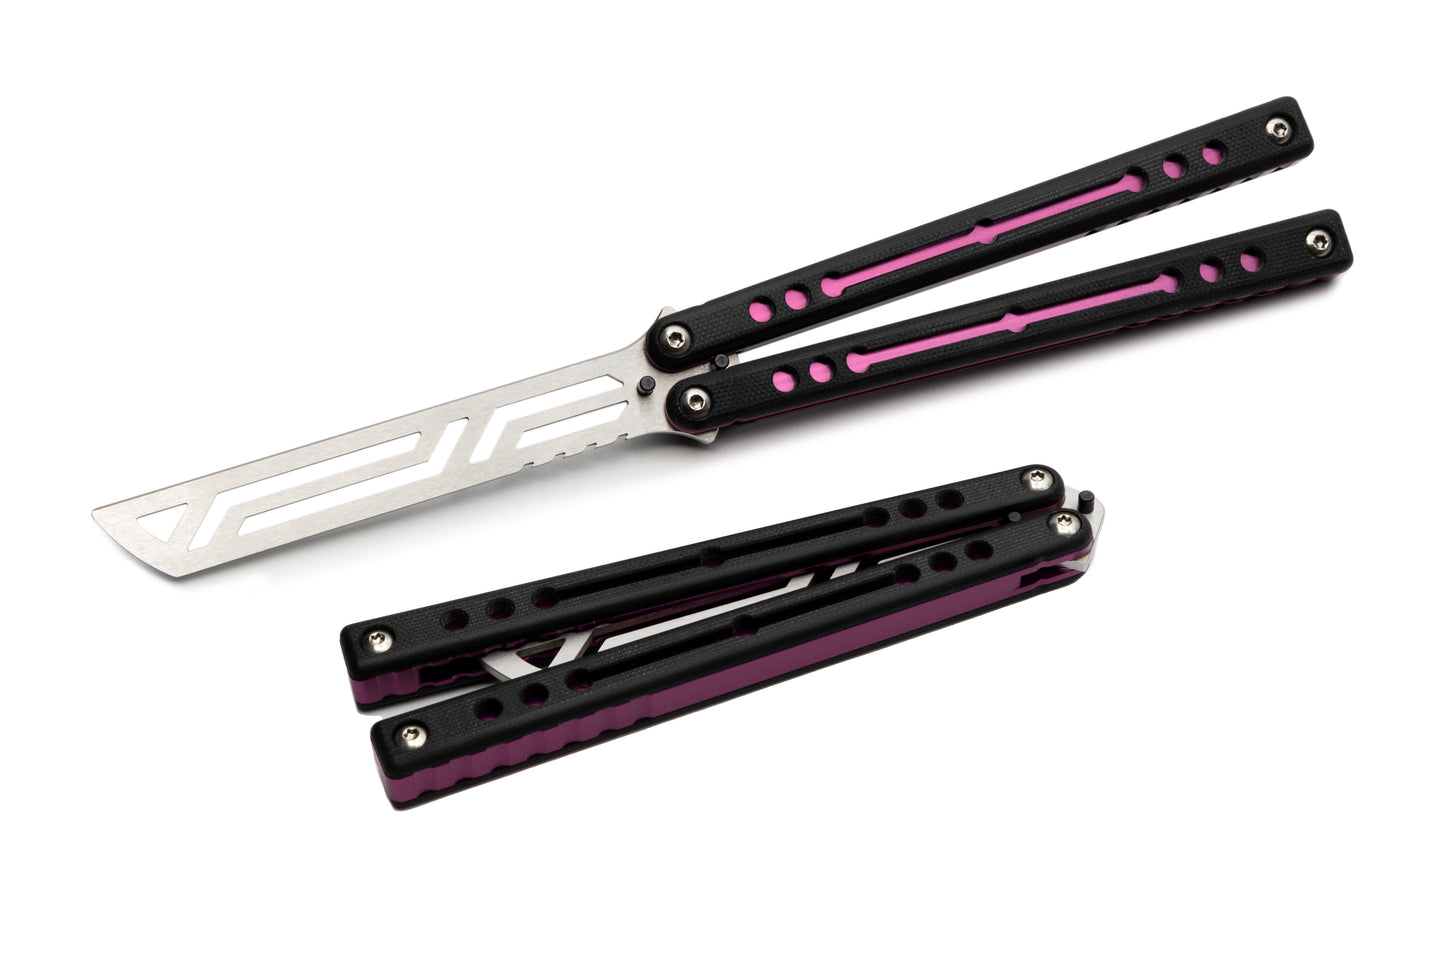 Pink NautilusV2 balisong with g10 scales